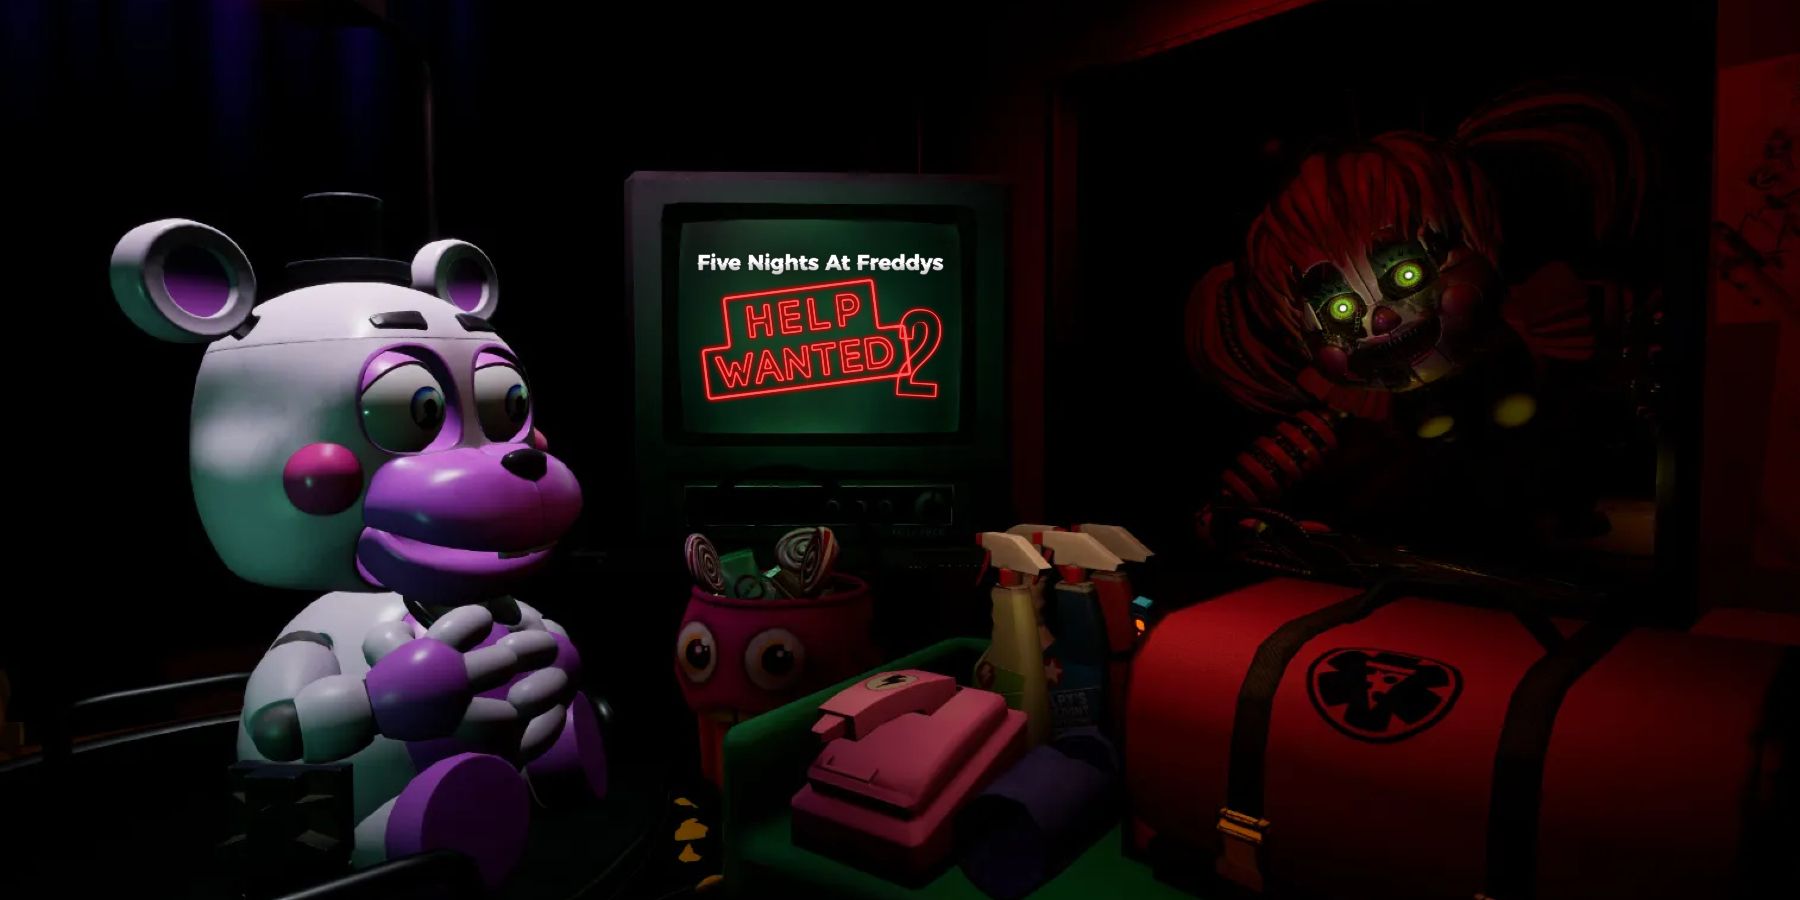 Five Nights At Freddy's: Help Wanted 2 Trailer